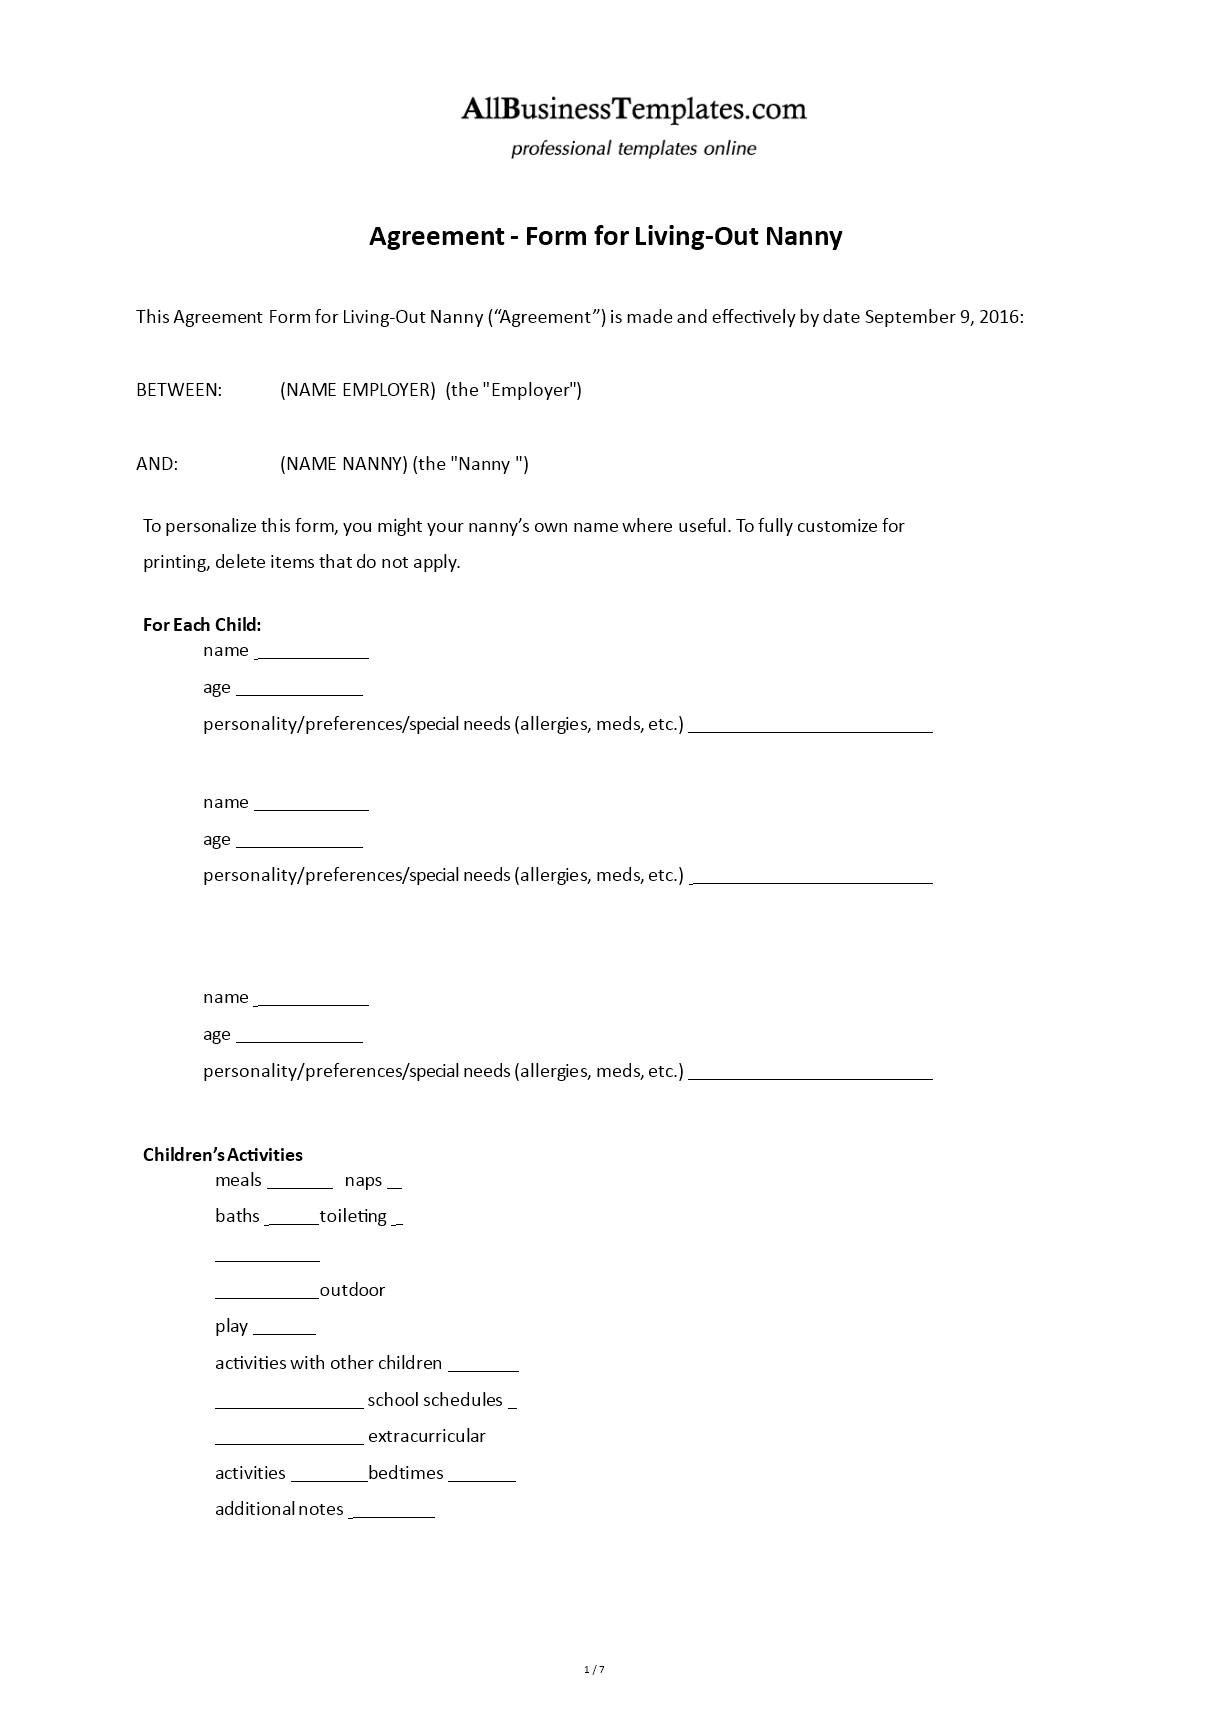 Contract Form For Living Out Nanny | Templates At Throughout Nanny Contract Template Word